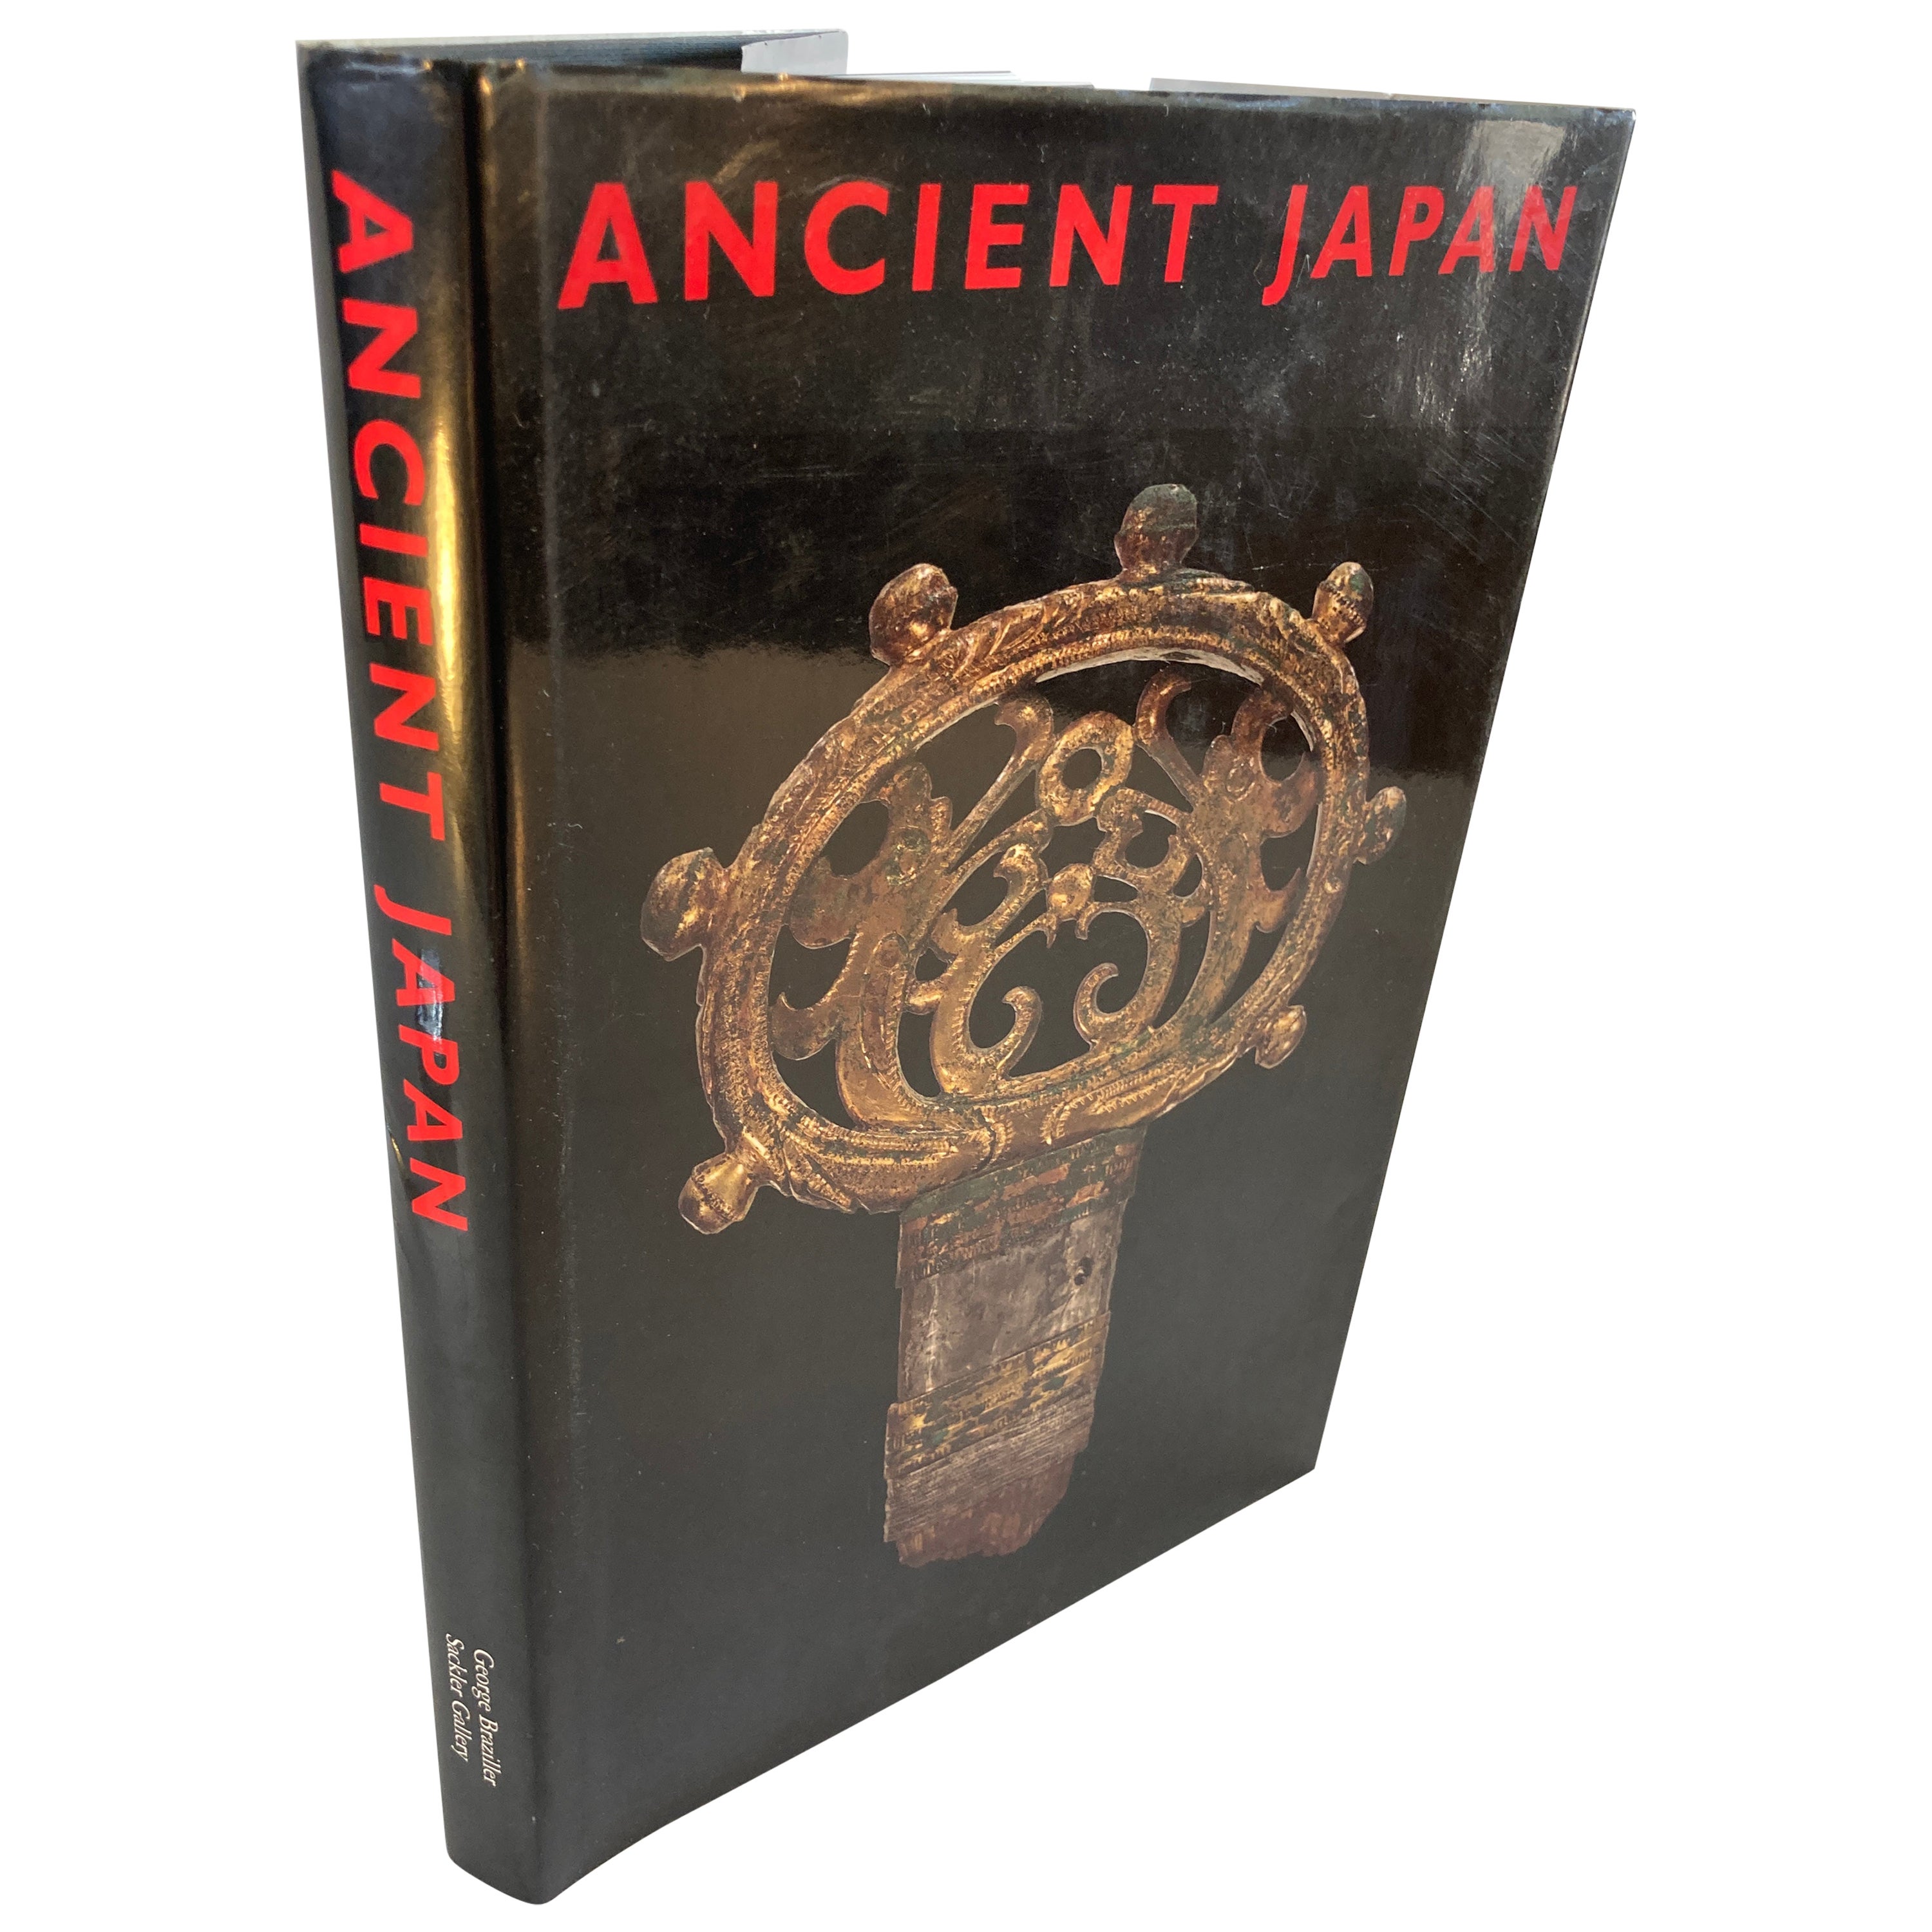 Ancient Japan Hardcover Art Book by Richard J. Pearson